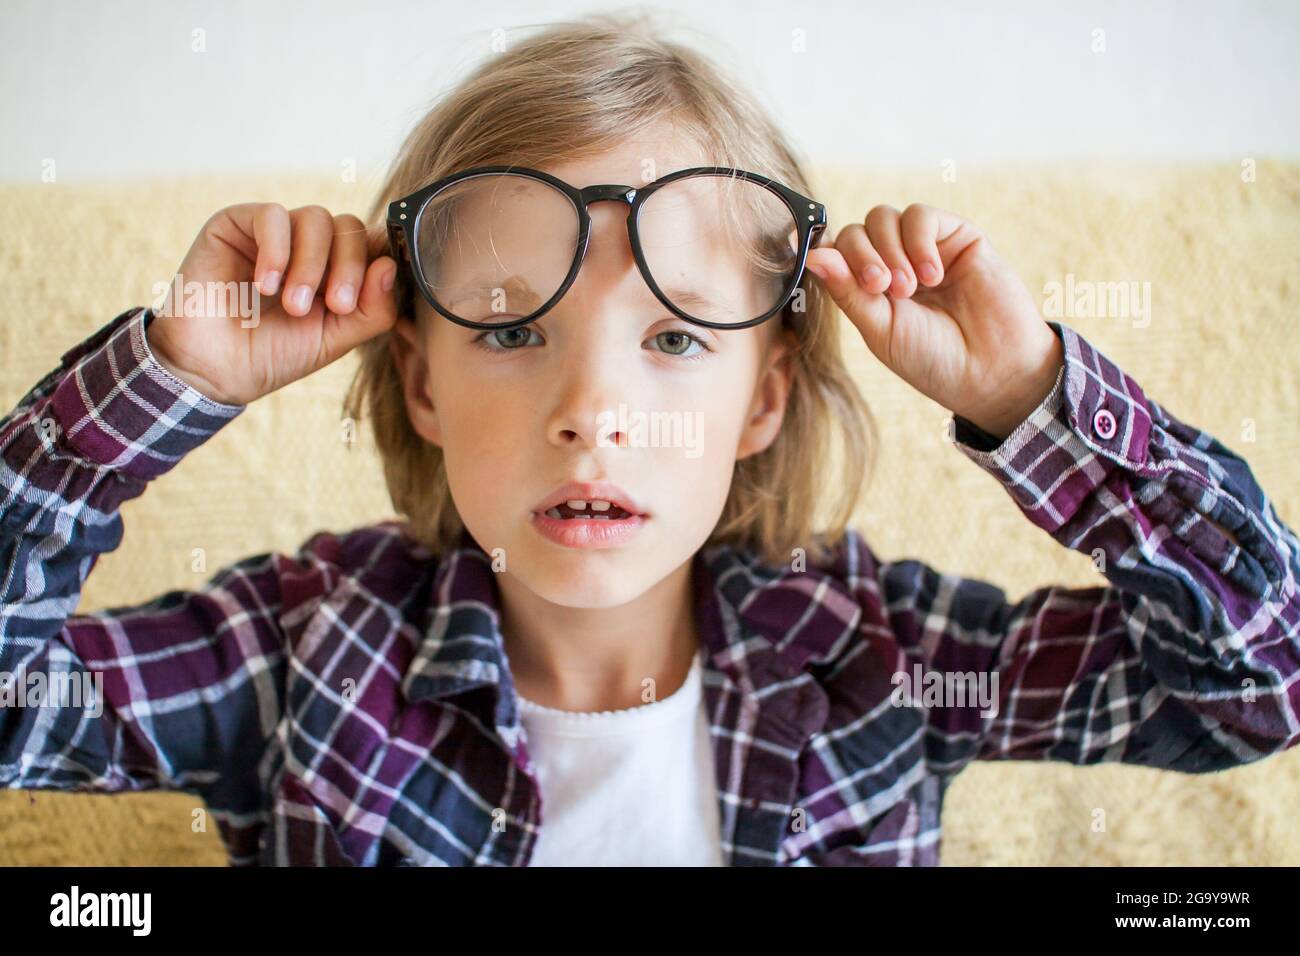 Tired, sleepy girl in a plaid shirt and glasses. Online learning concept. Stock Photo